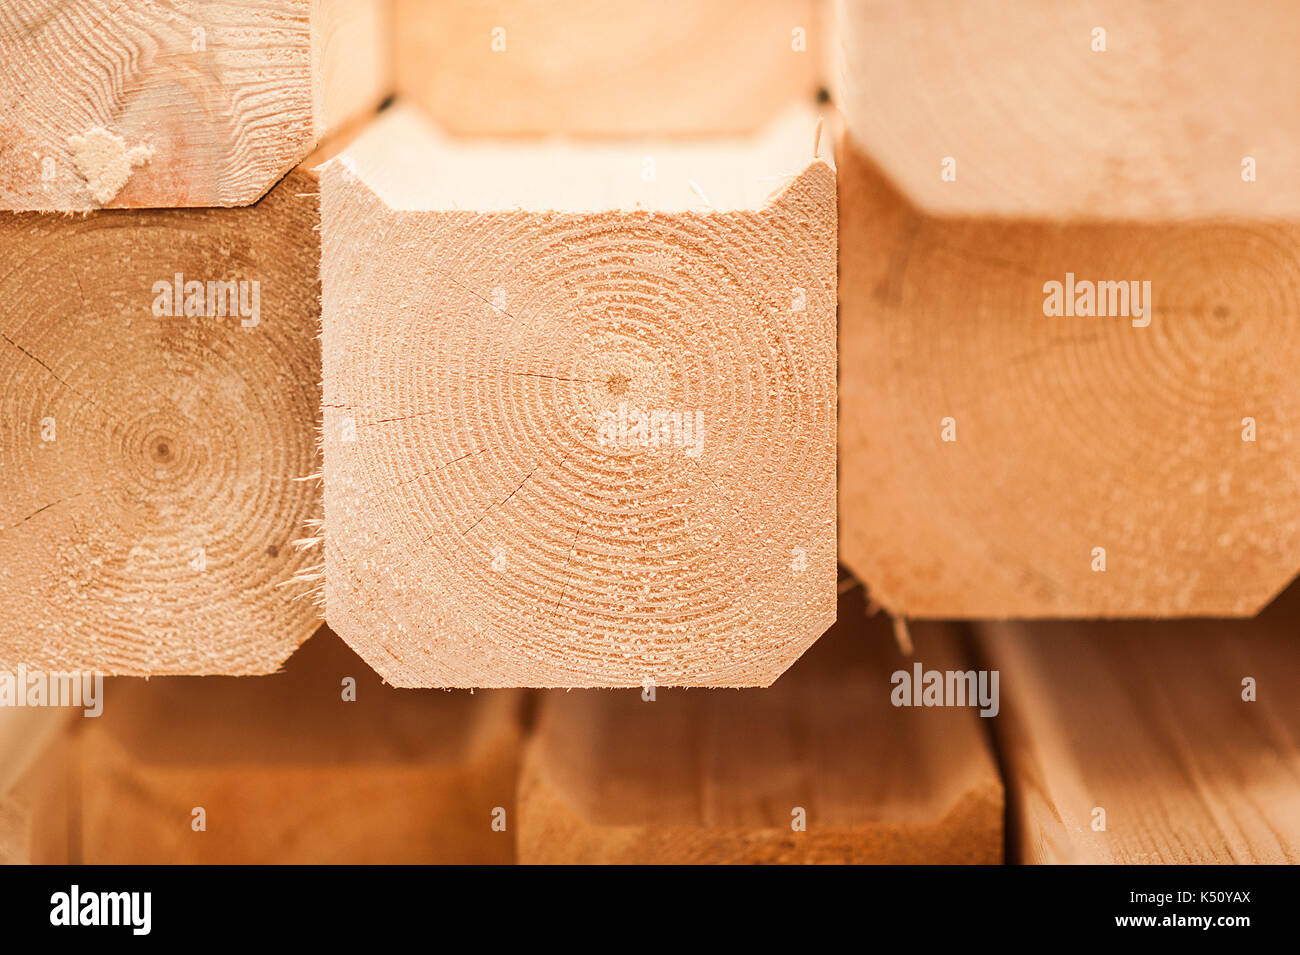 lumber industrial wood texture, timber butts background. Butt end of a processed wooden beam. many elements Stock Photo